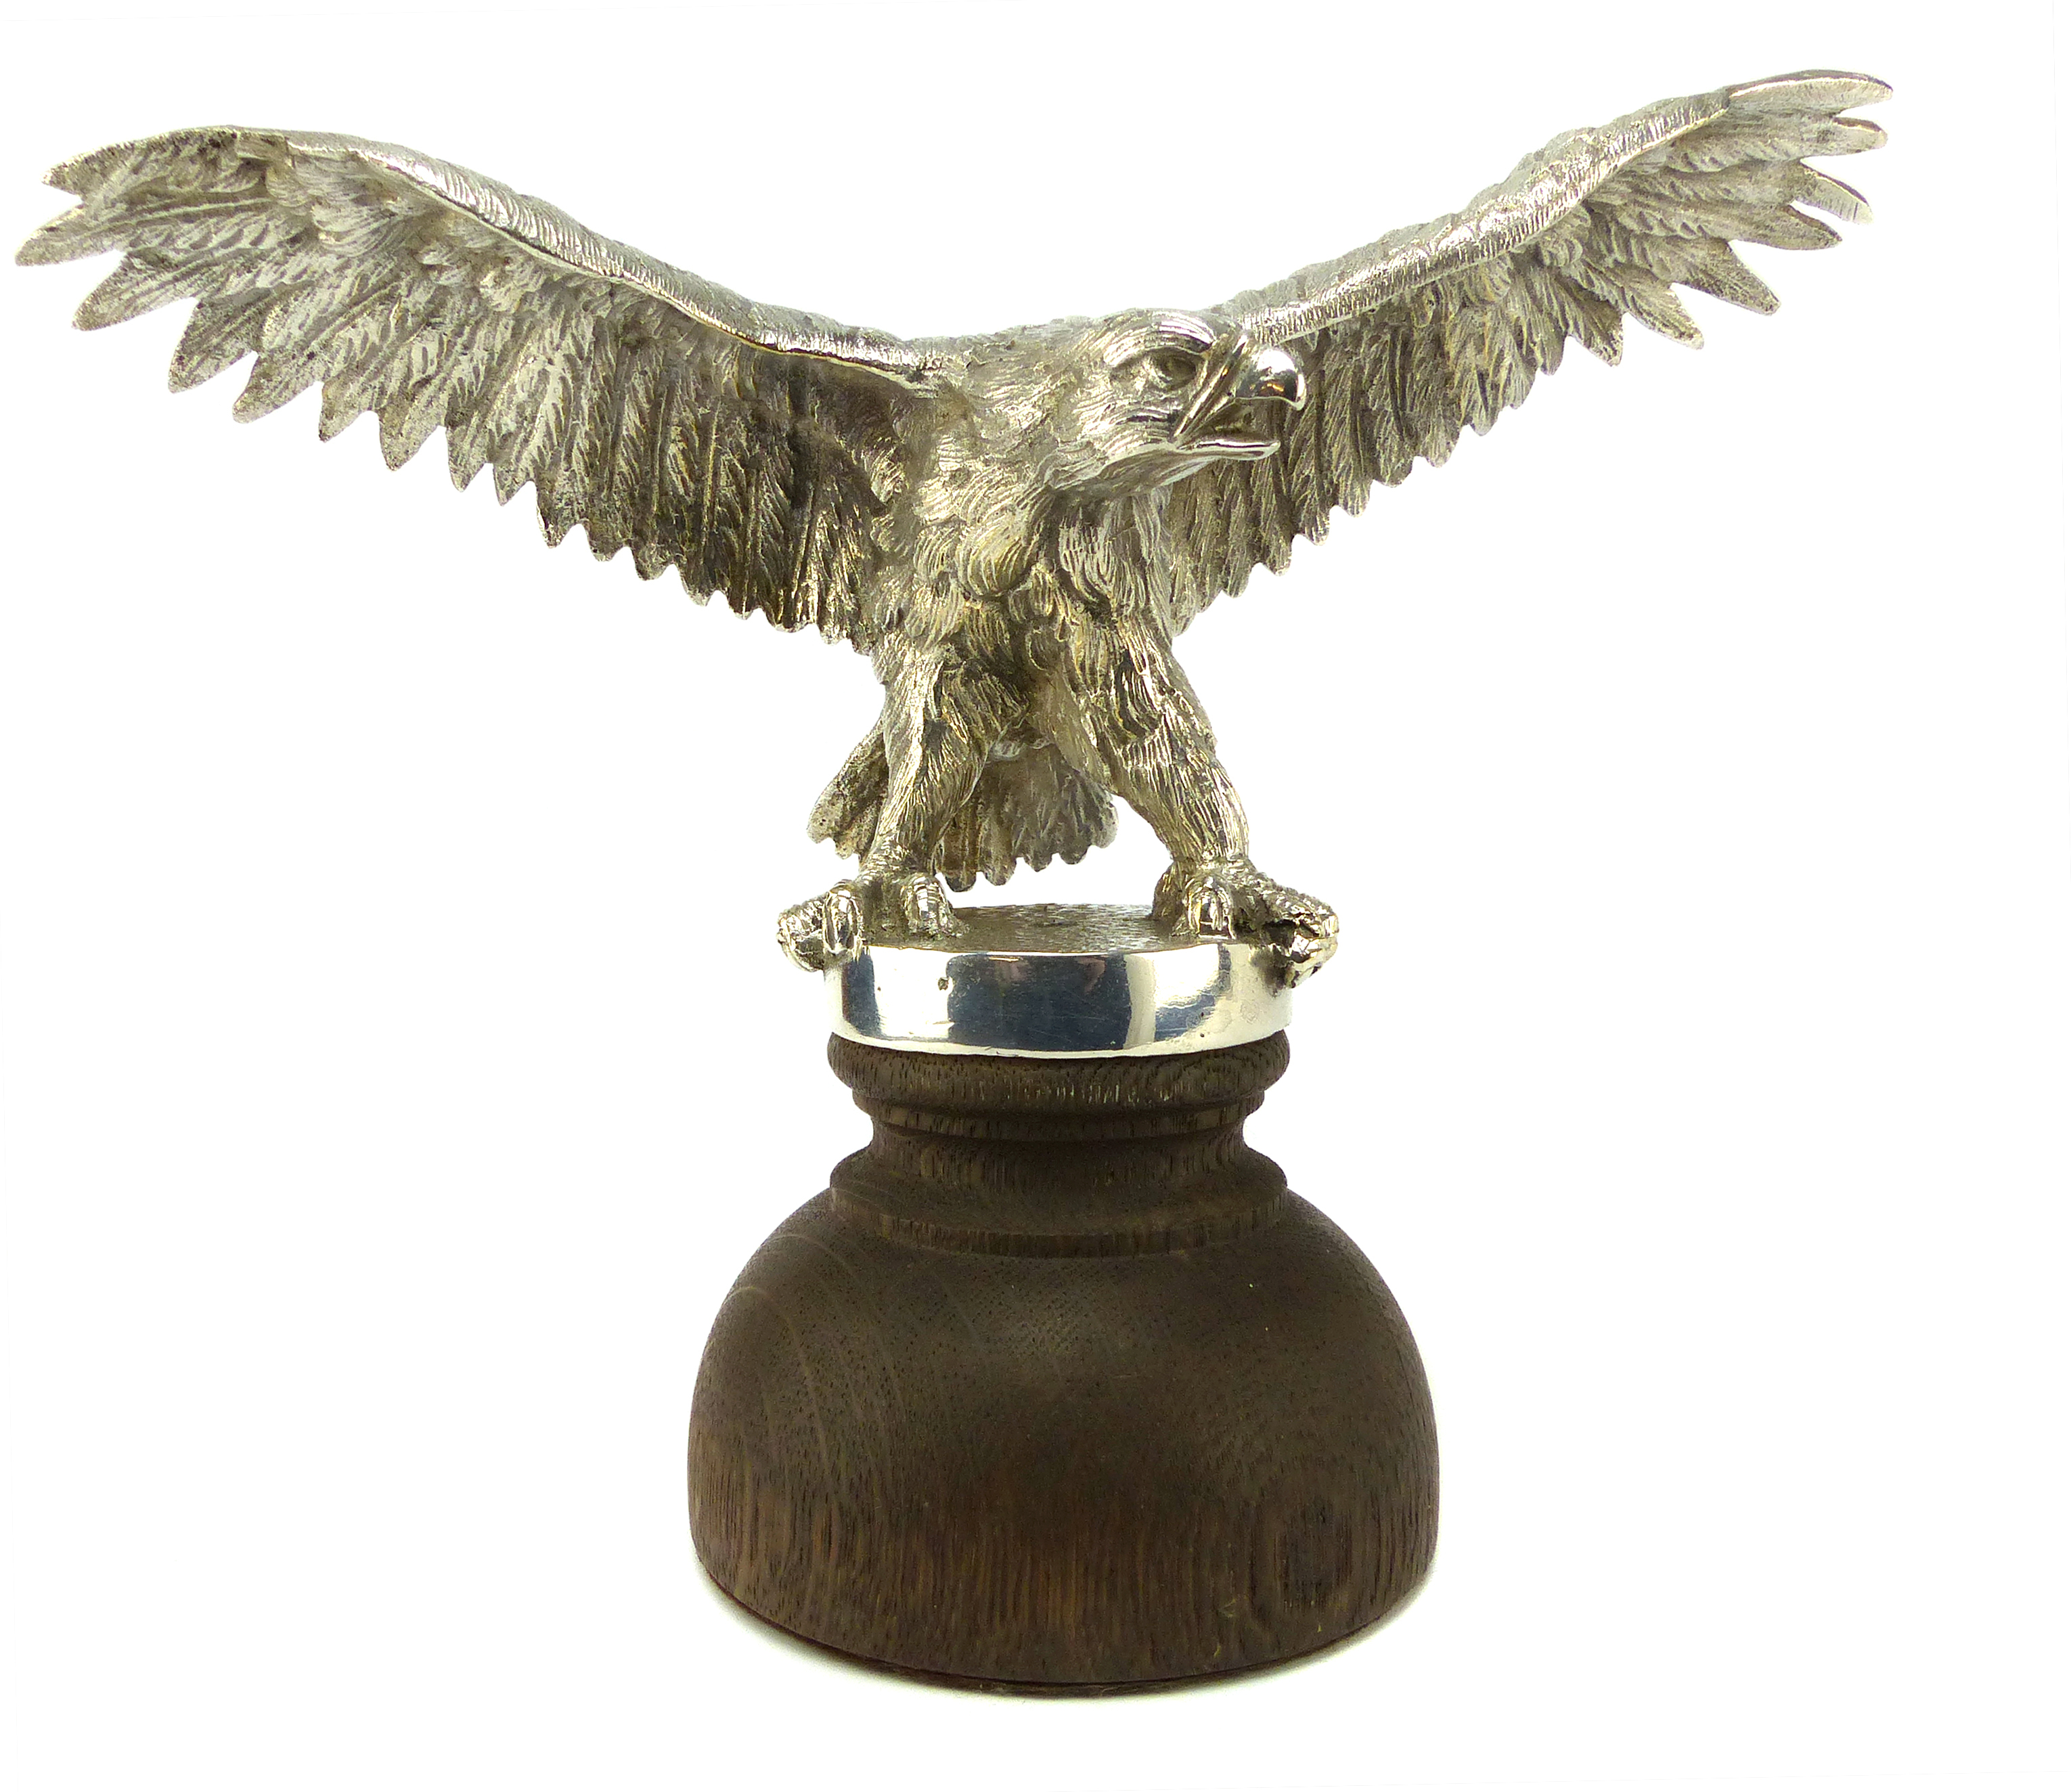 A Silvered bronze statue of an American bald eagle cast in detail to show the eagle with its wings